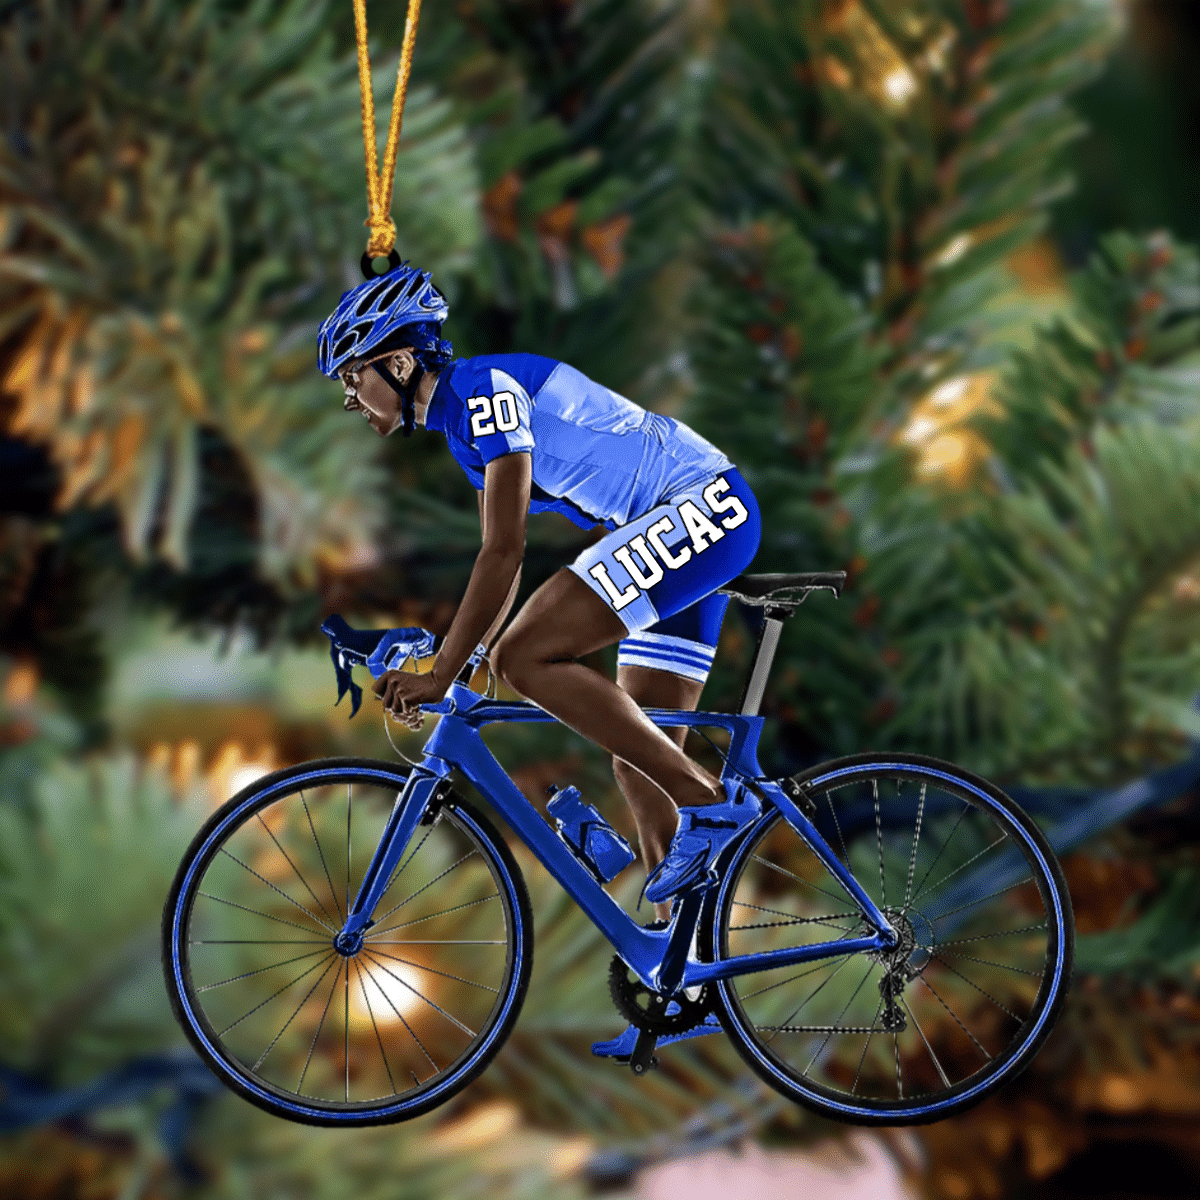 Customized African American Cyclist/ Female Cyclist Bike Riding Acrylic Christmas Ornament Gift For Cyclists